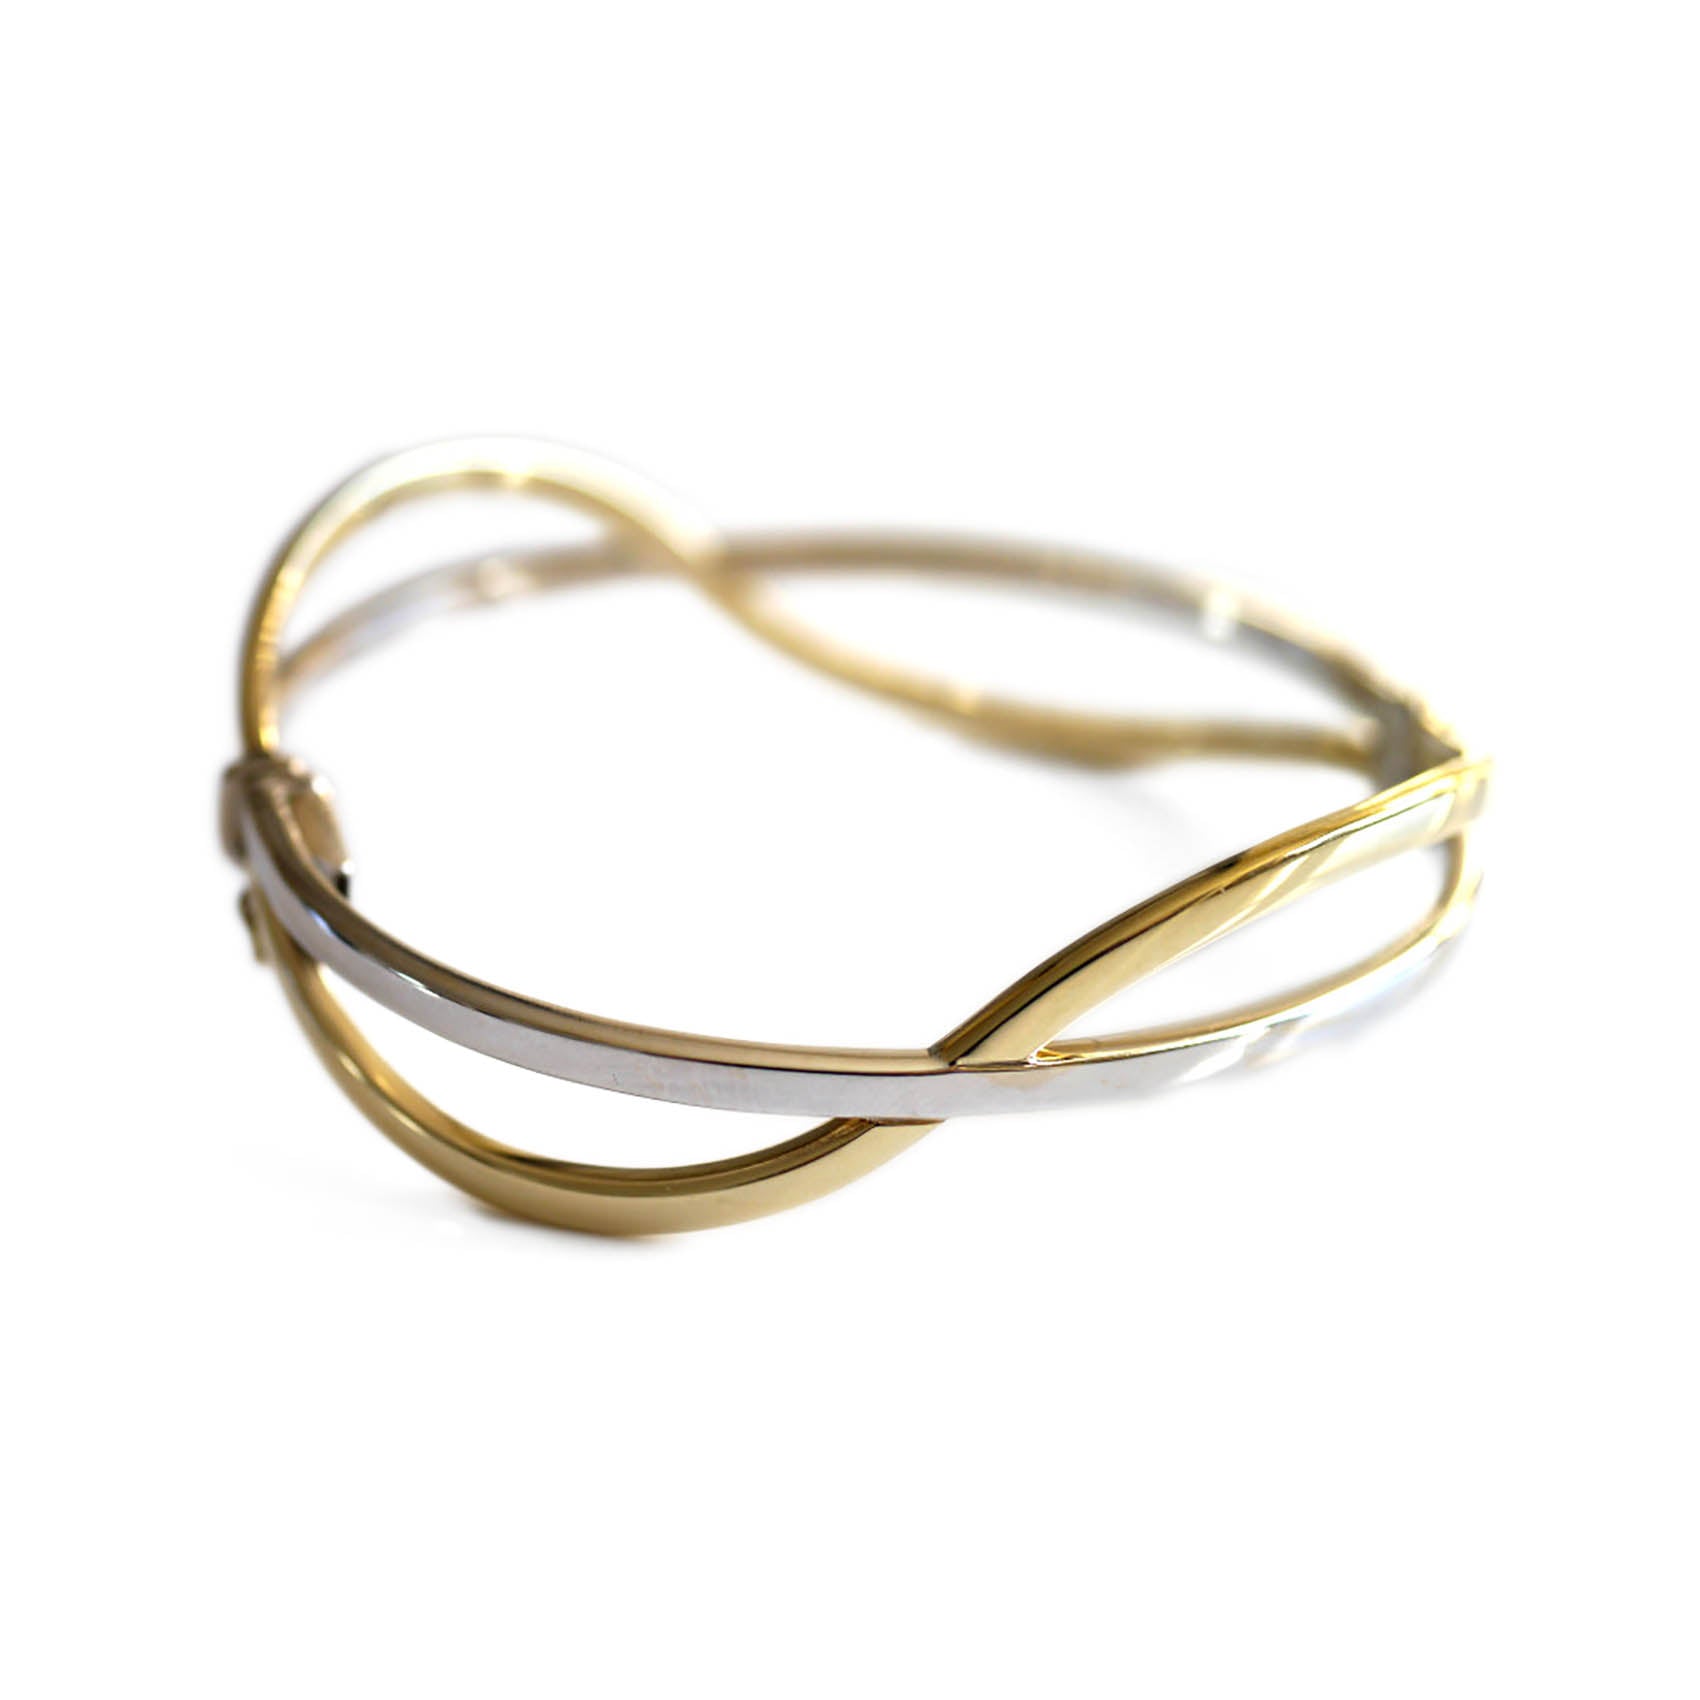 Vintage Yellow and White Vintage Gold Two Tone Bangle